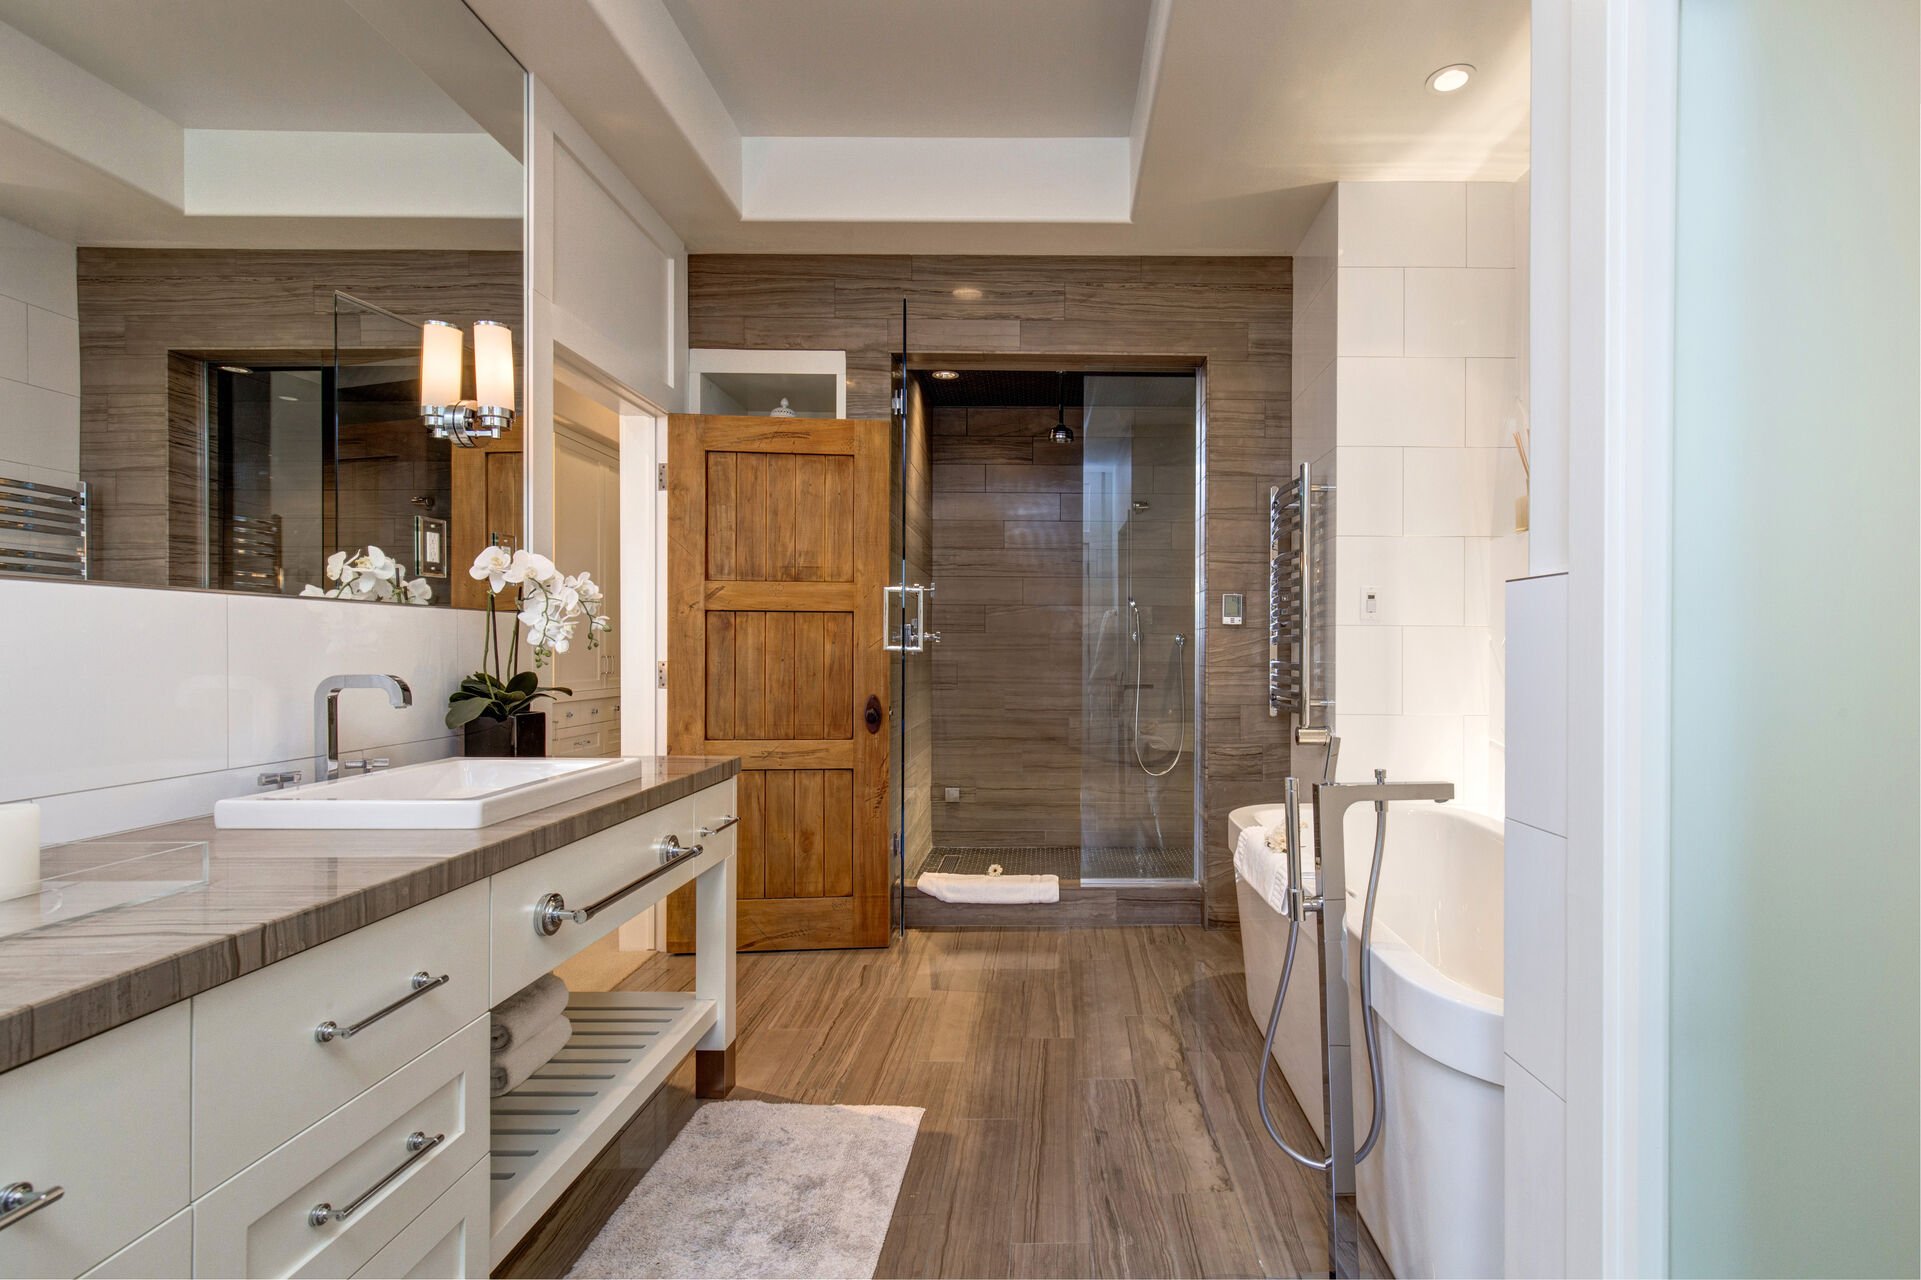 Master Bathroom with double vanity, towel warmers, oversized tile shower, large soaking tub, and hot tub patio access